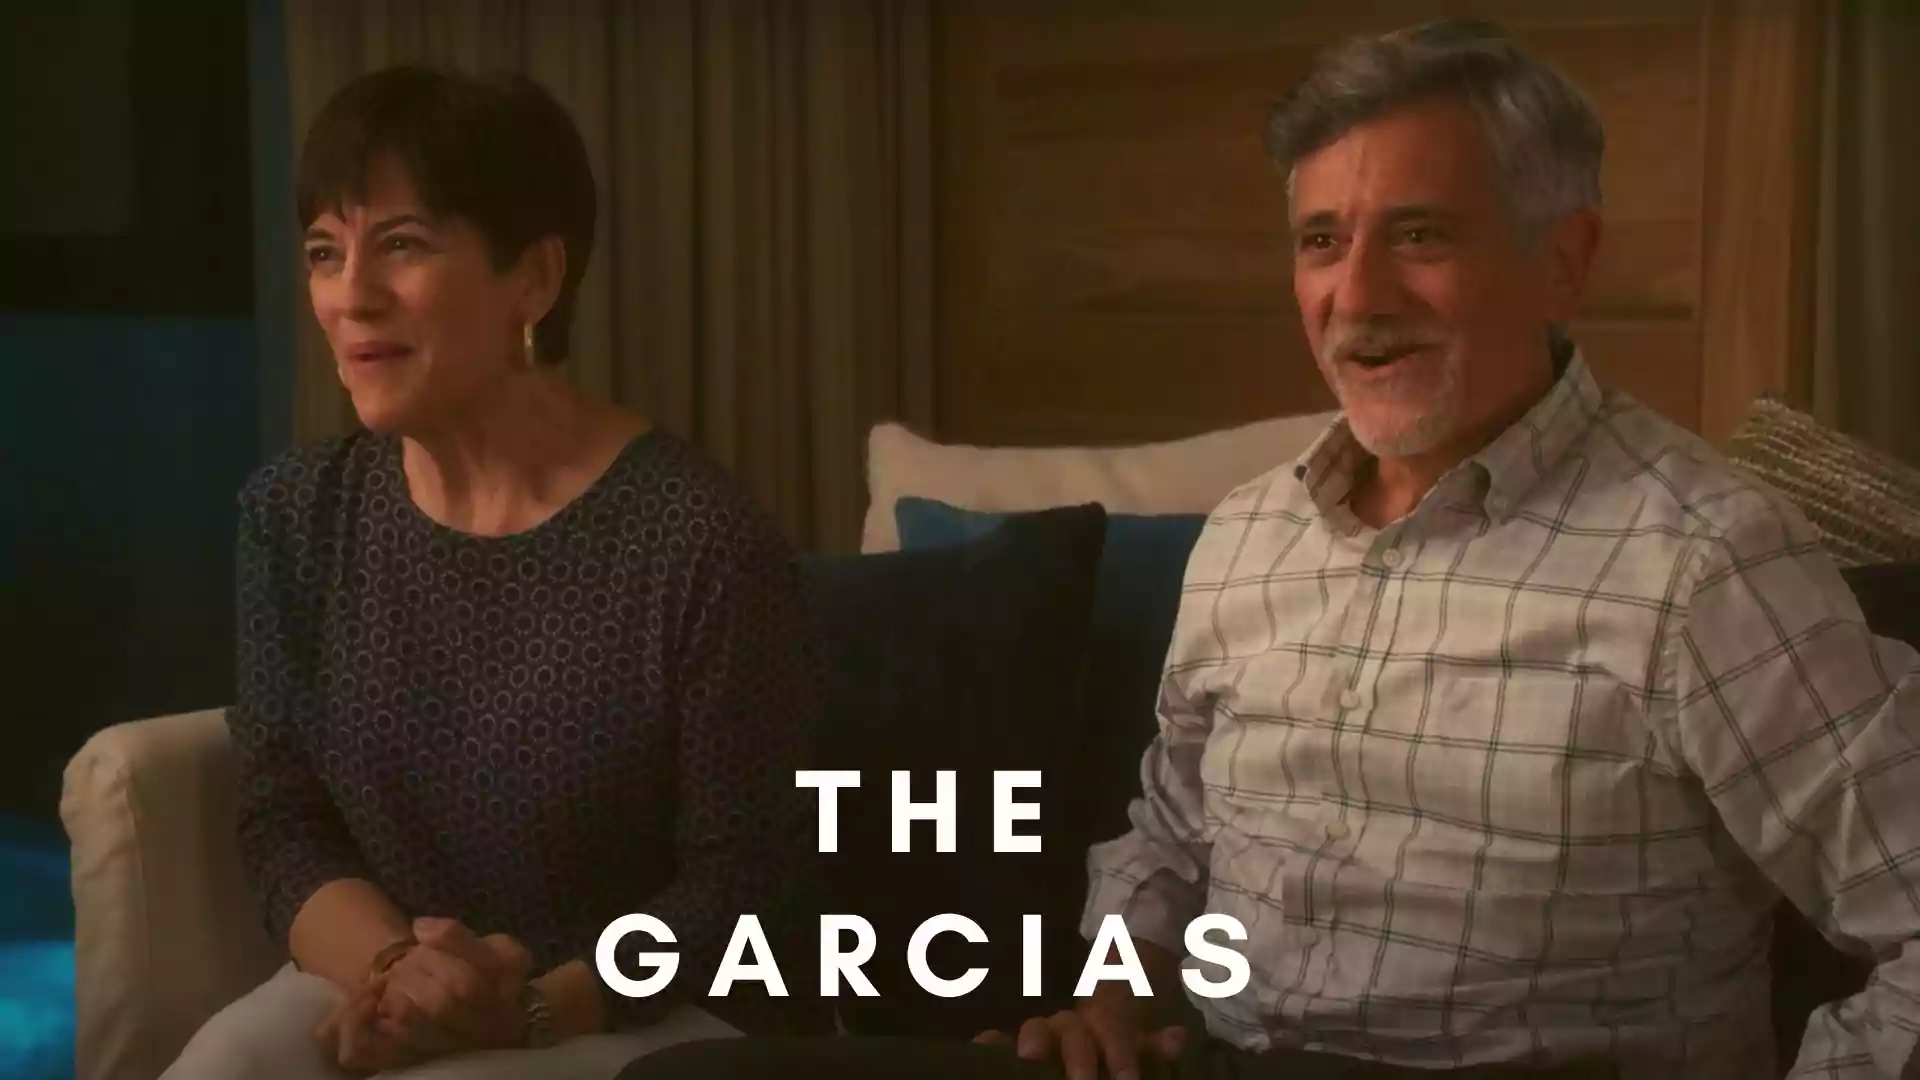 The Garcias Wallpaper and Image